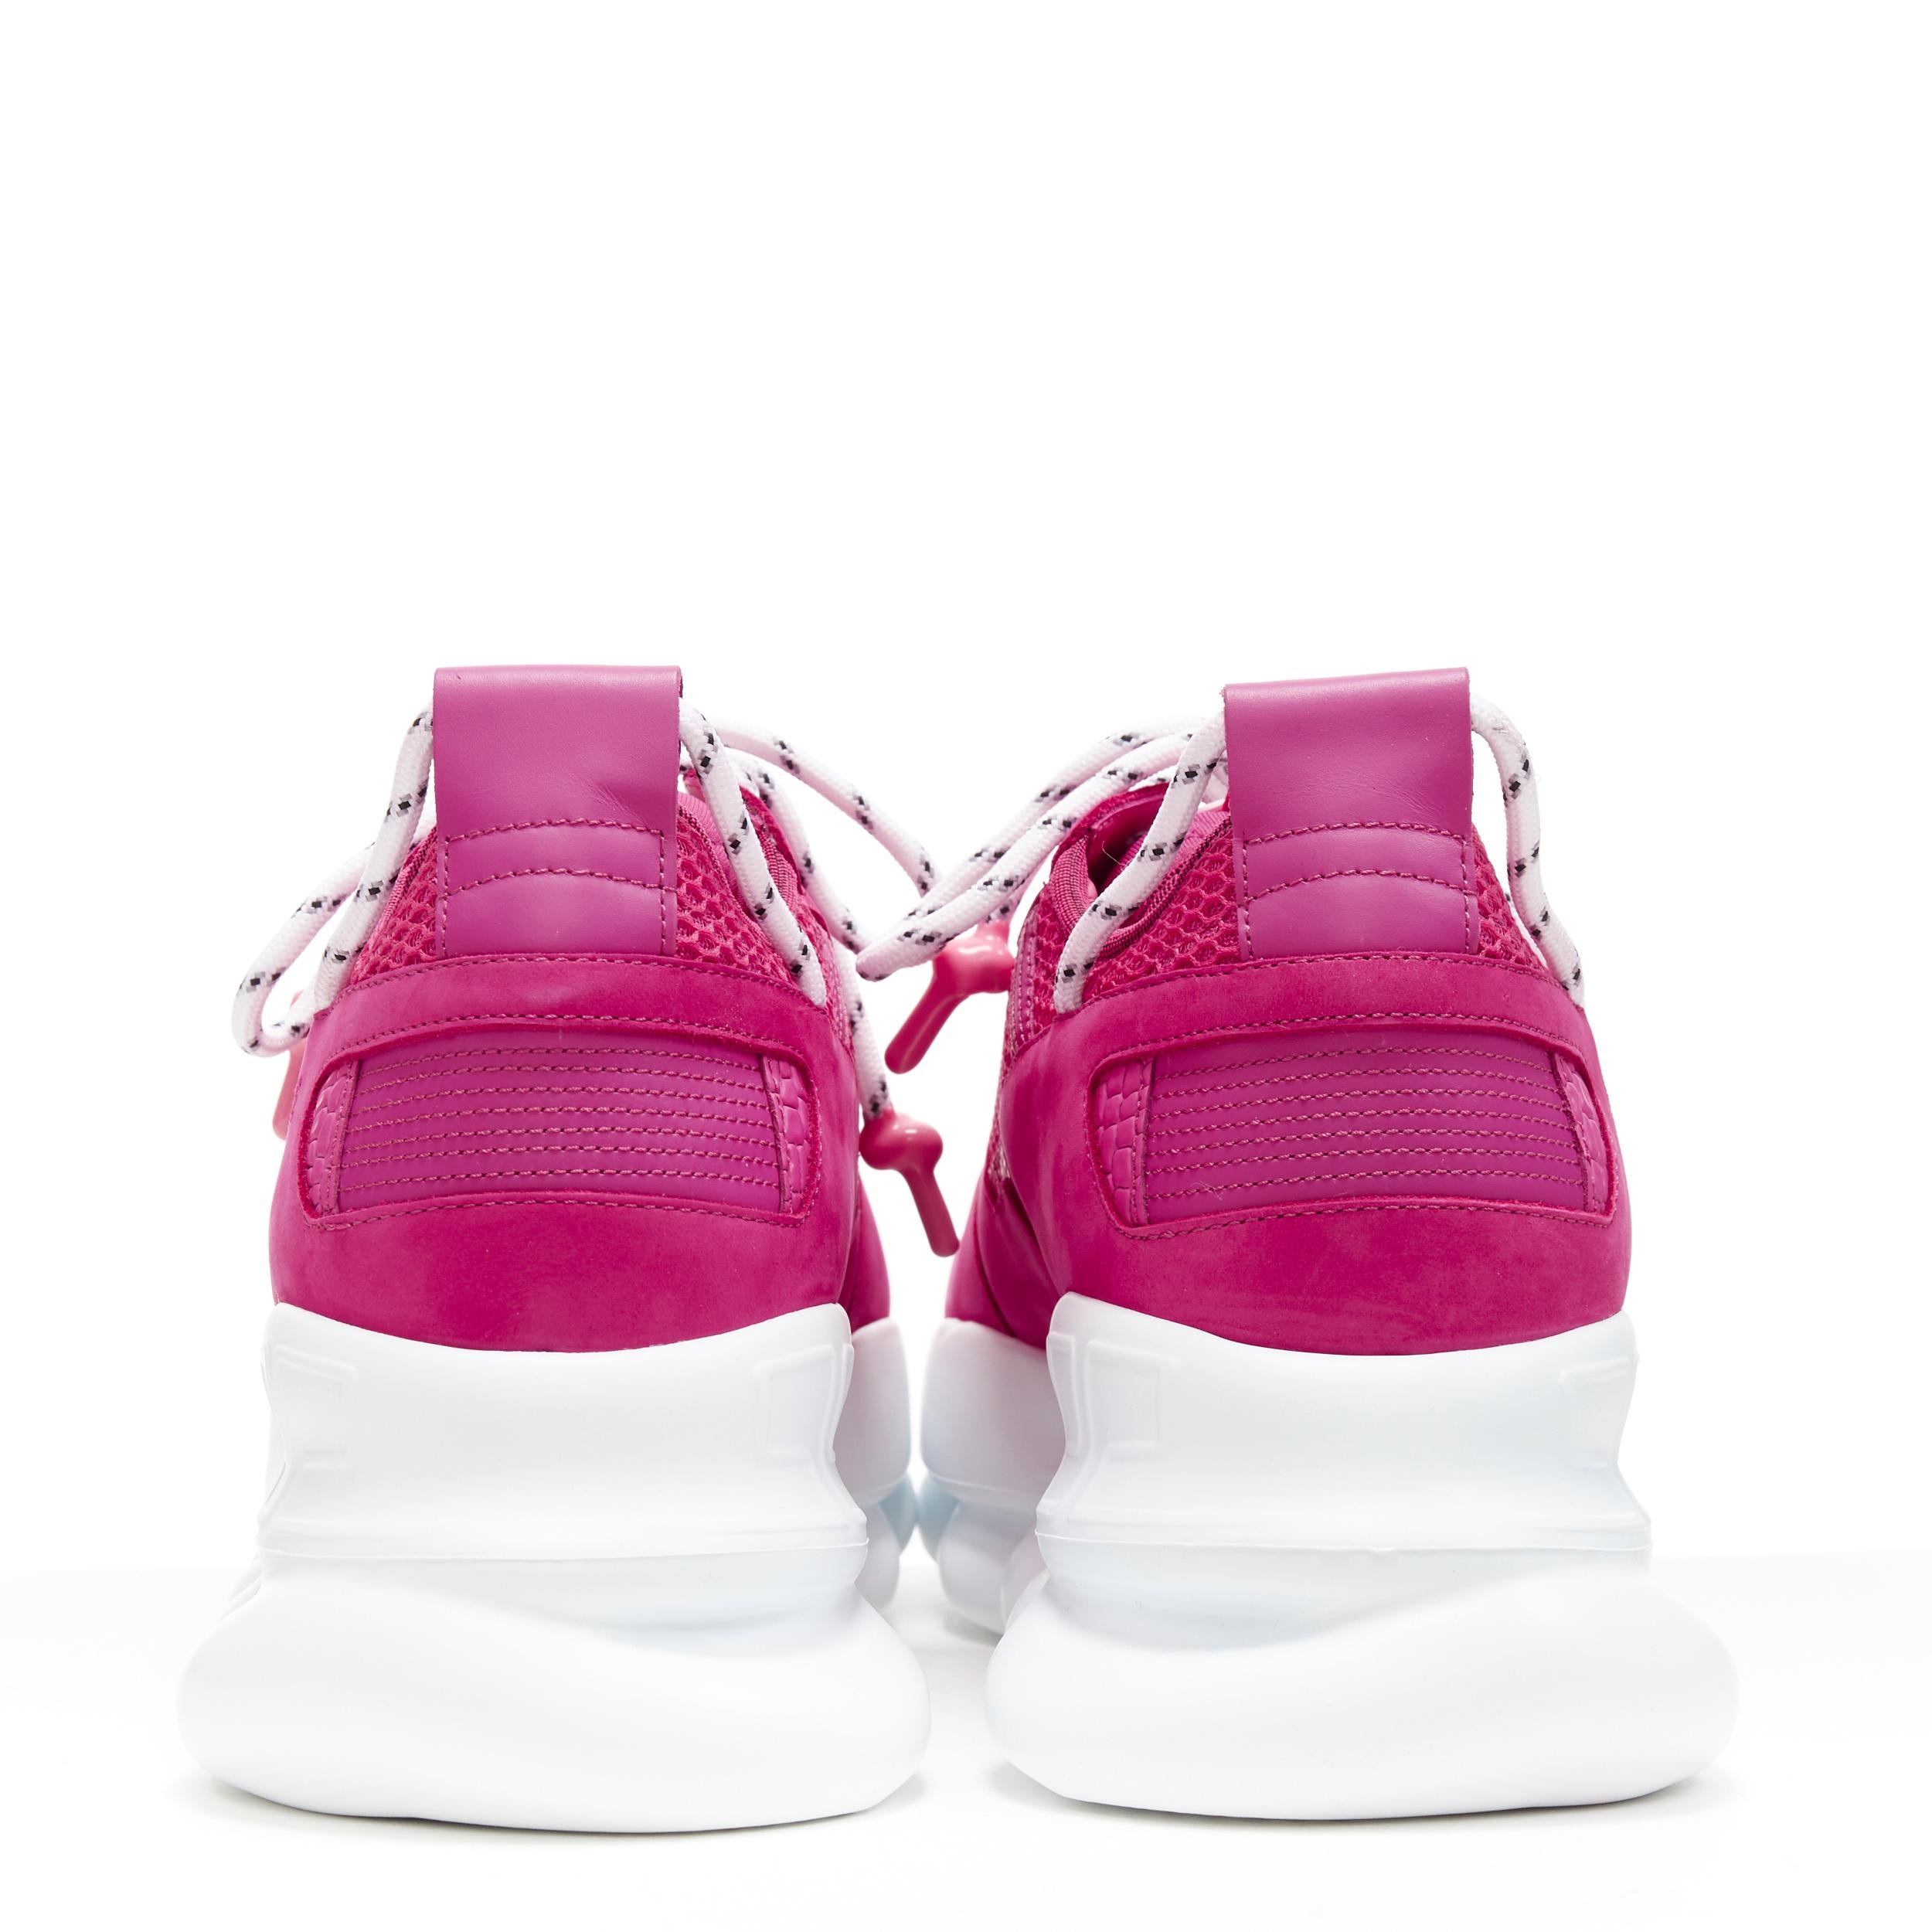 versace chain reaction shoes pink